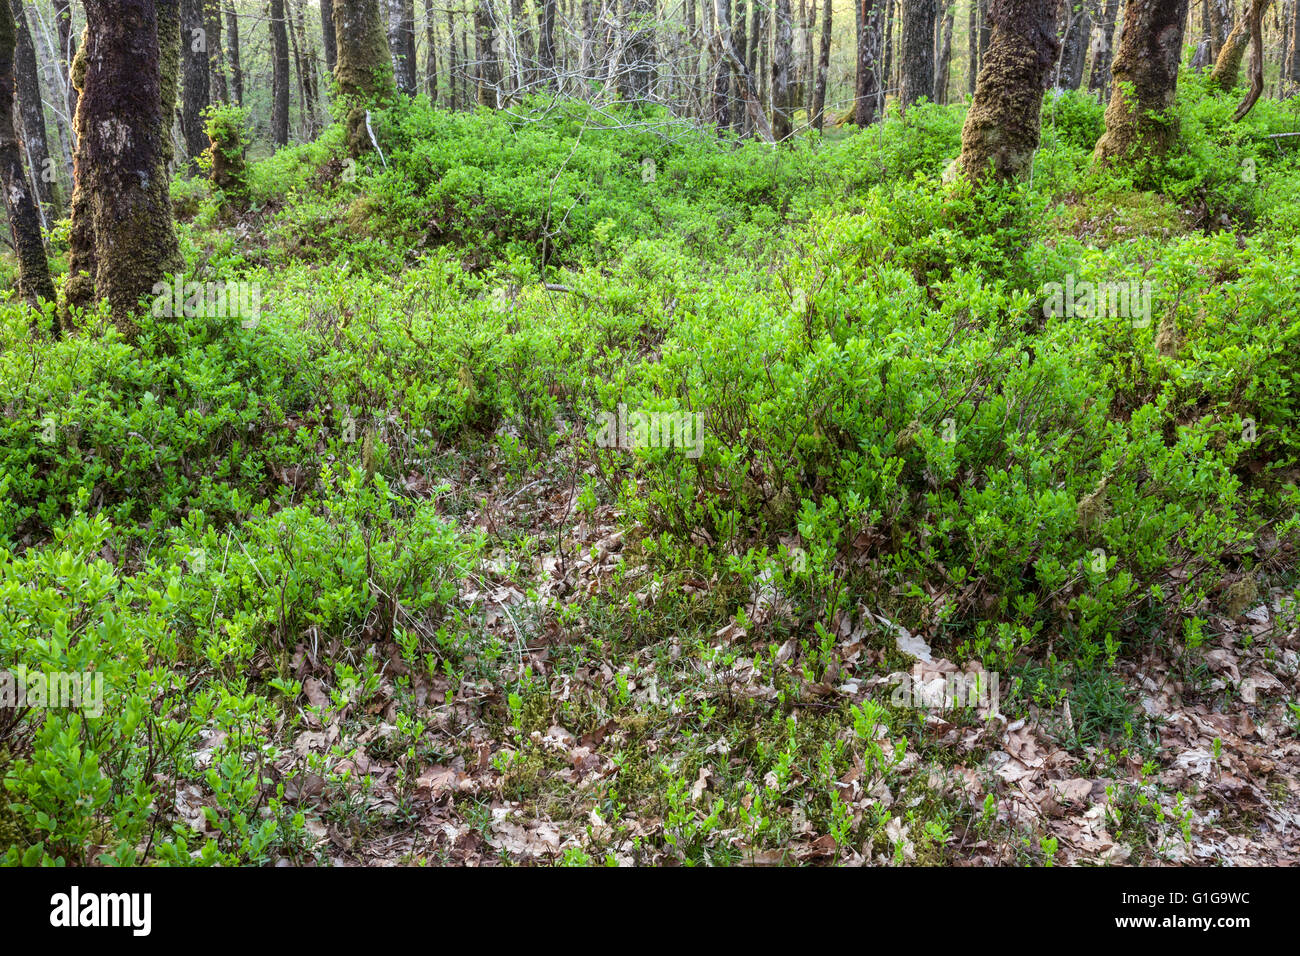 Bilberry / Blaeberry understorey at the RSPB Wood of Cree Nature Reserve, near Newton Stewart, Dumfries and Galloway, Scotland Stock Photo